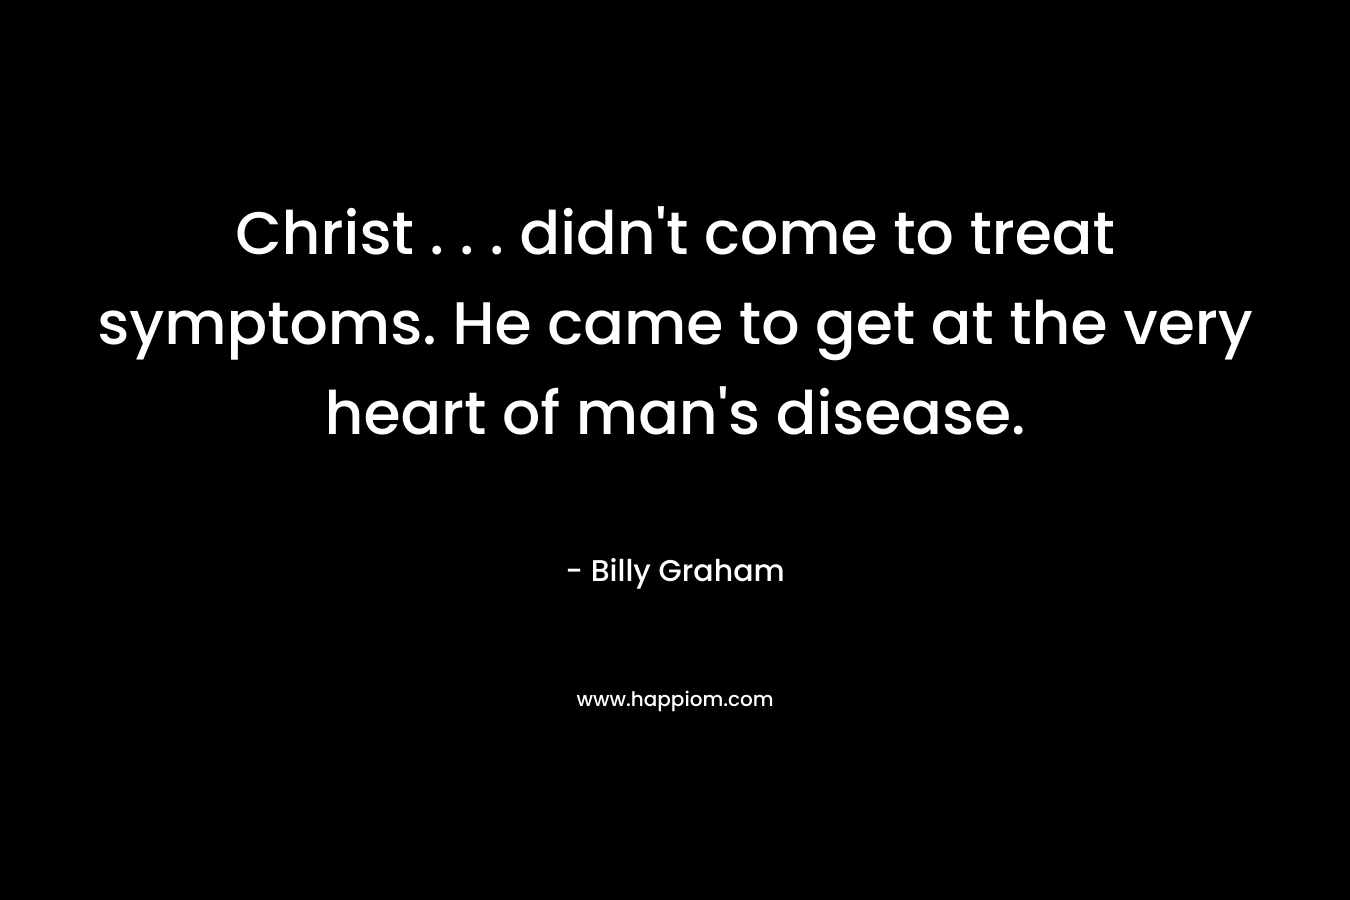 Christ . . . didn't come to treat symptoms. He came to get at the very heart of man's disease.